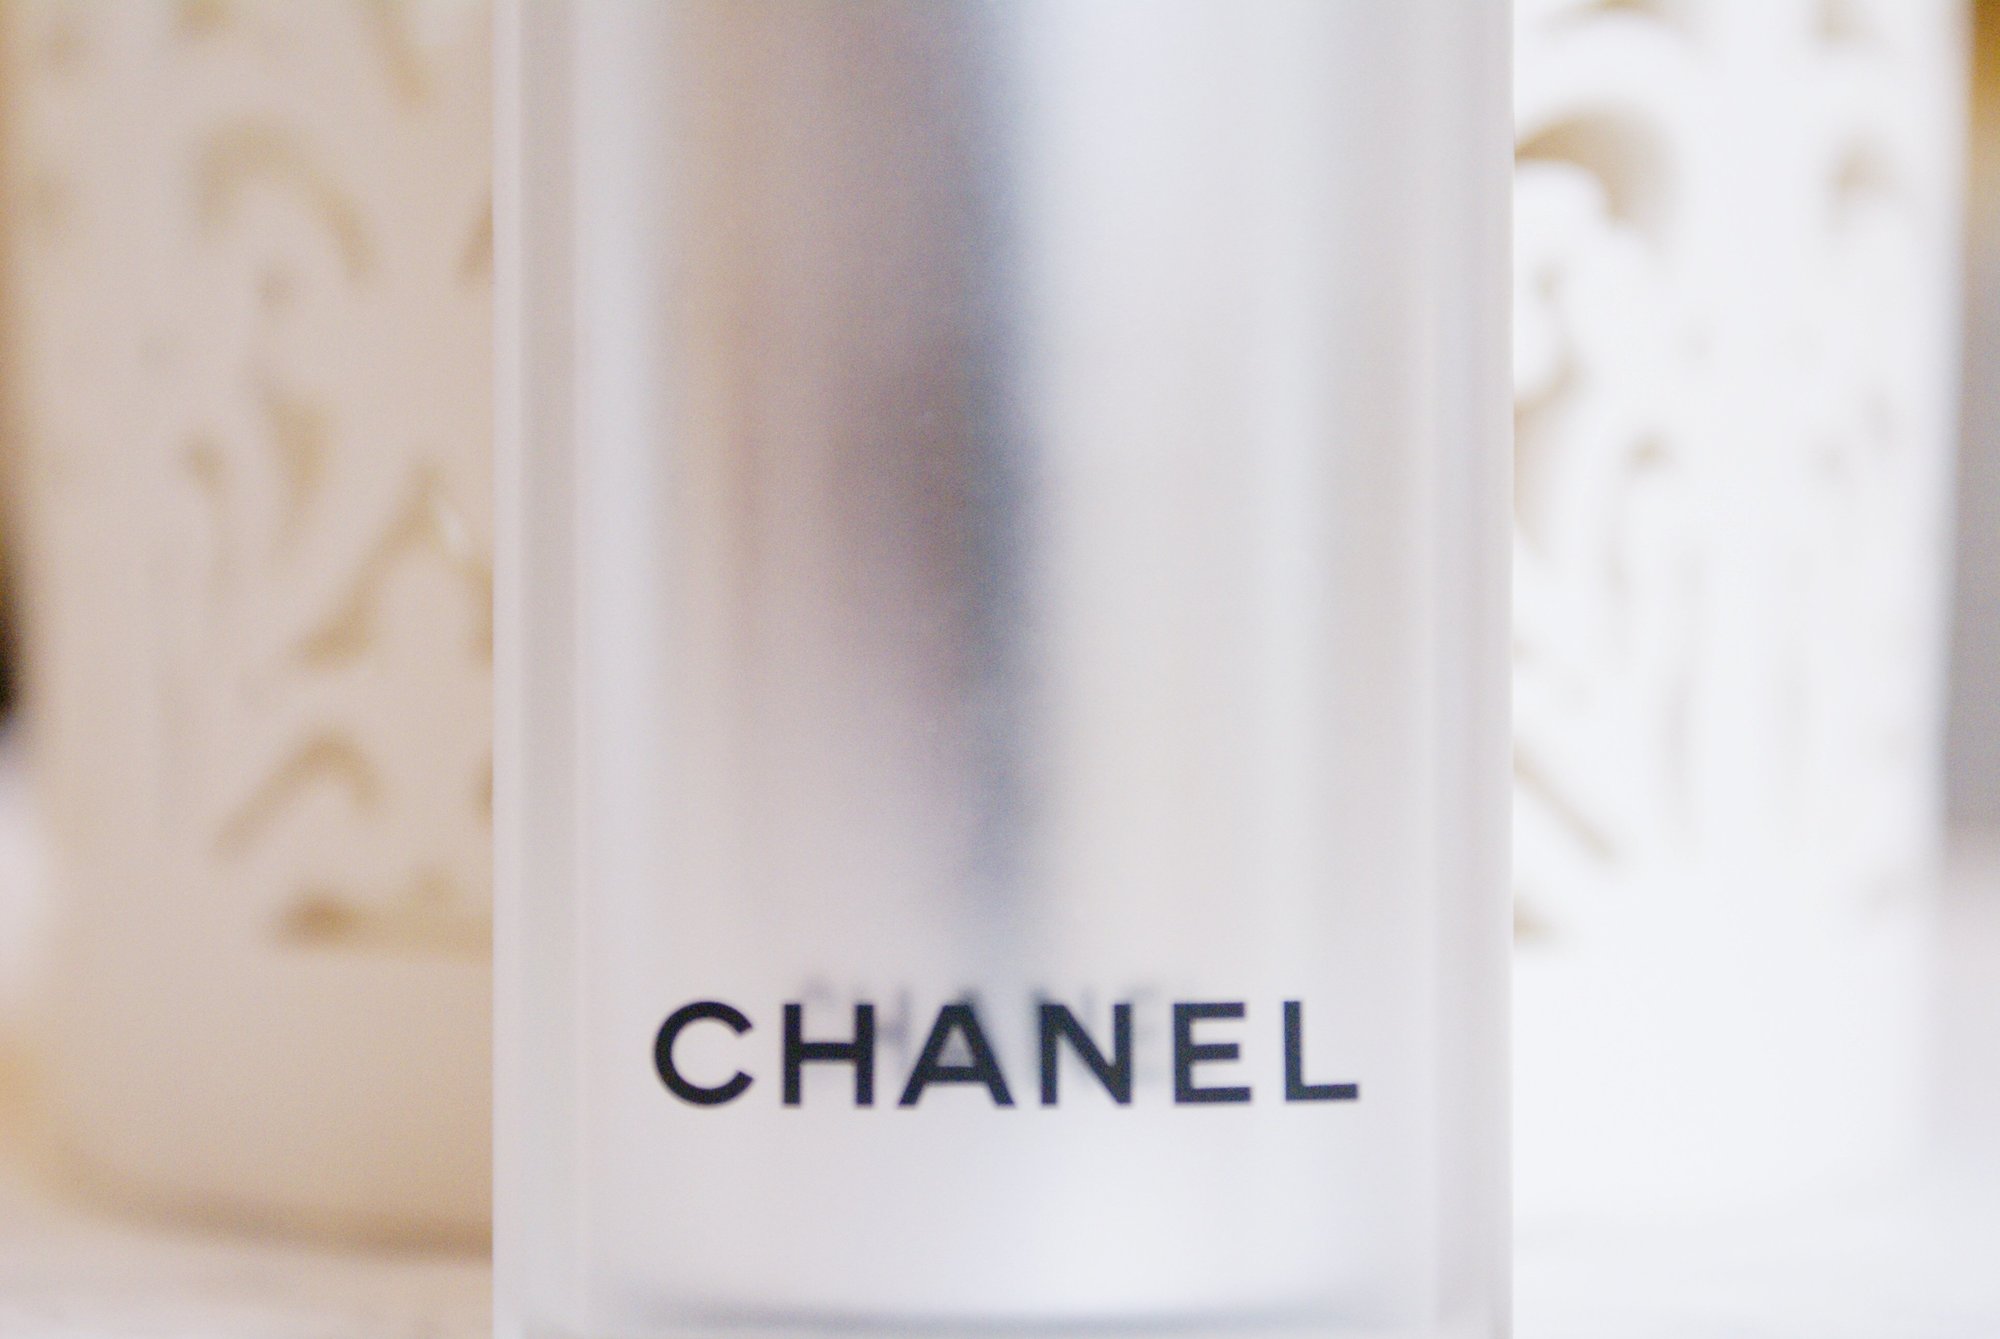 Close up of Chanel le Blanc serum